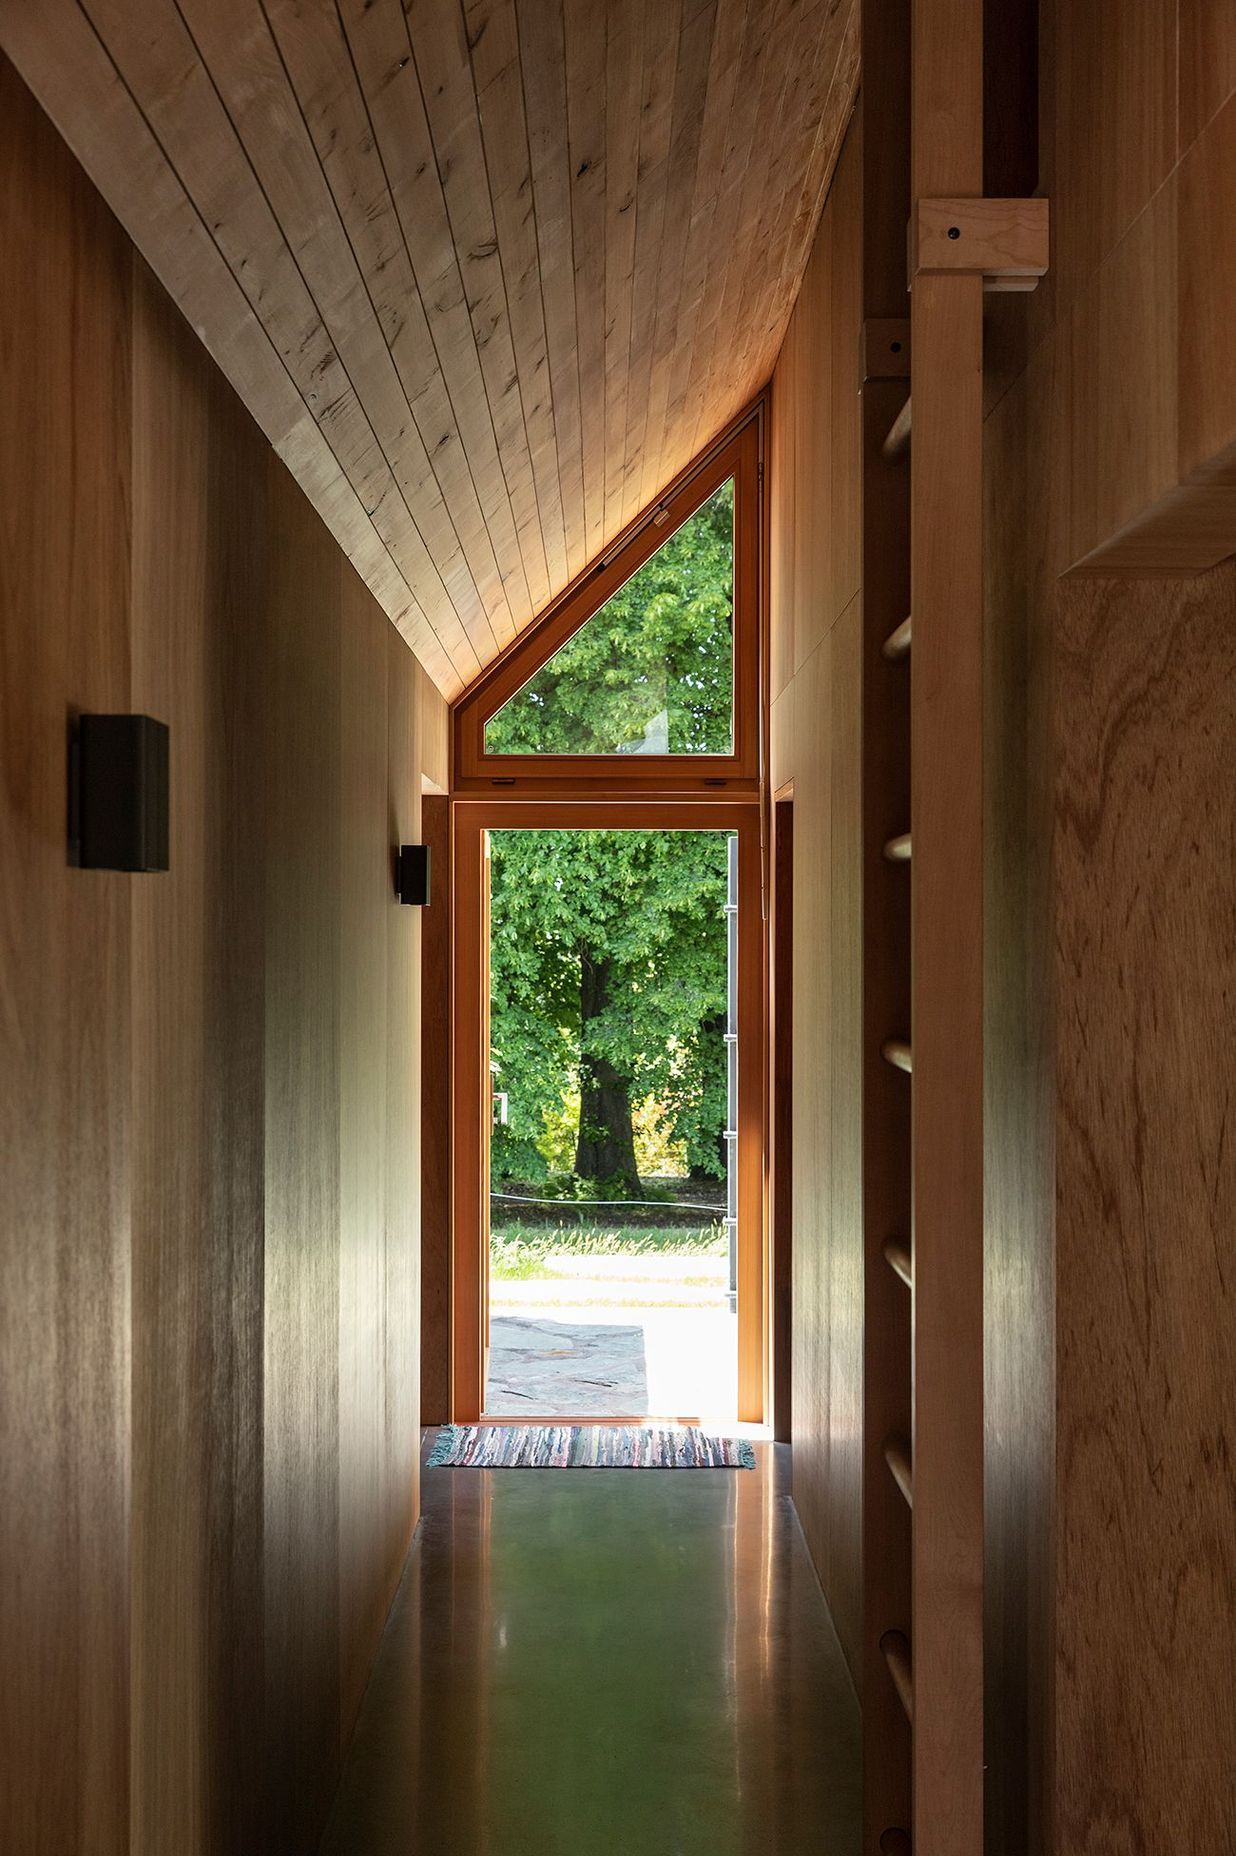 The corridor lines up with a large oak tree, accentuated by the steeply angled roof.